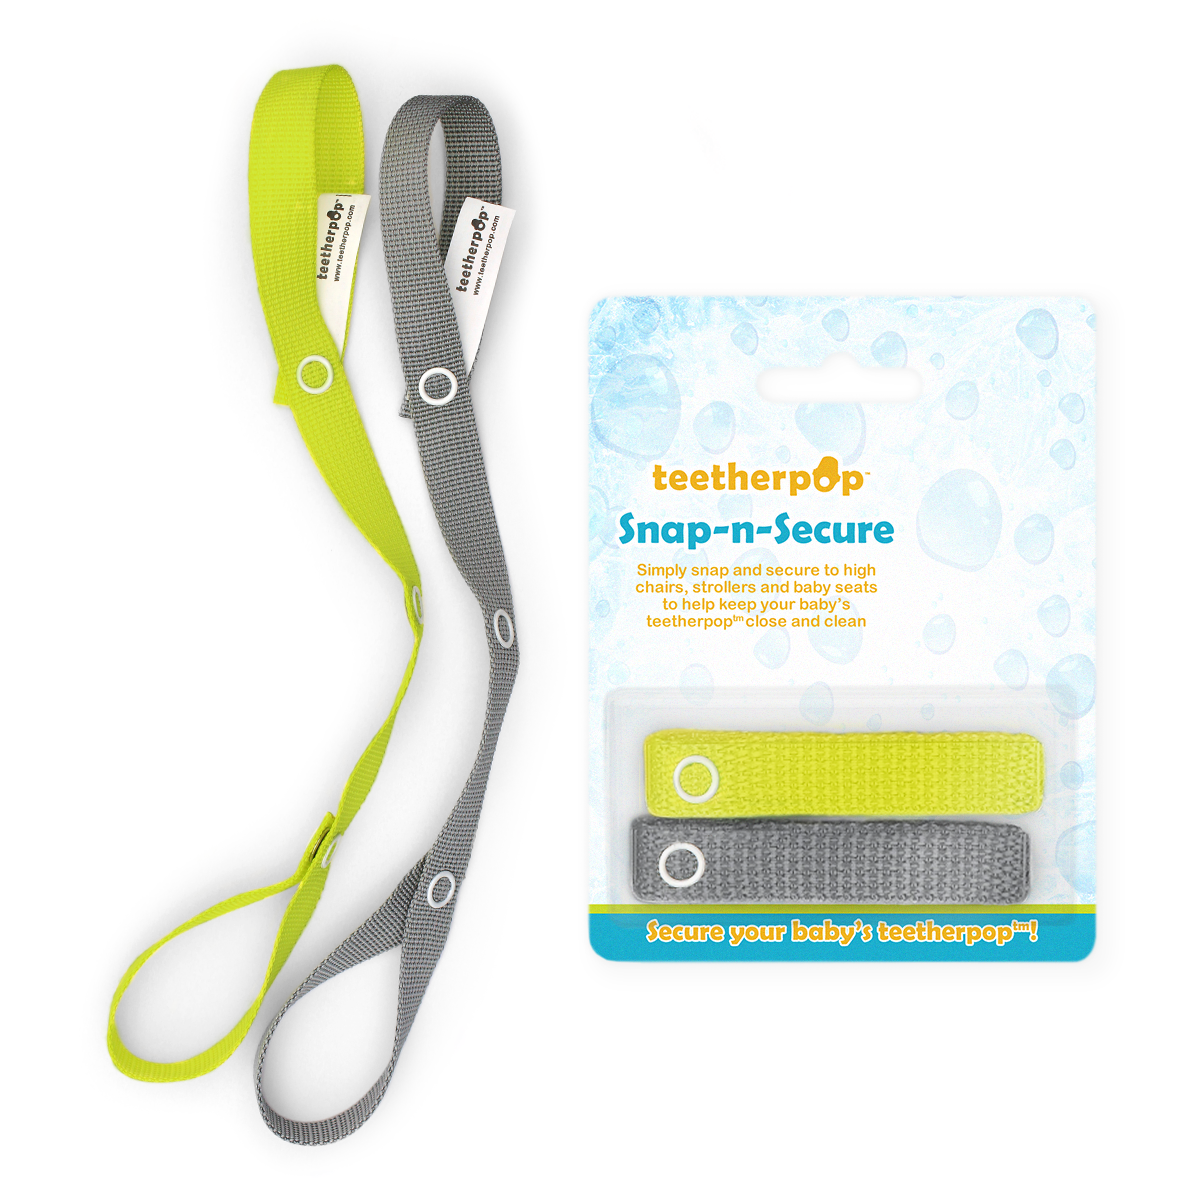 Teetherpop™ Snap and Secure - Keep Your Baby's Items Close and